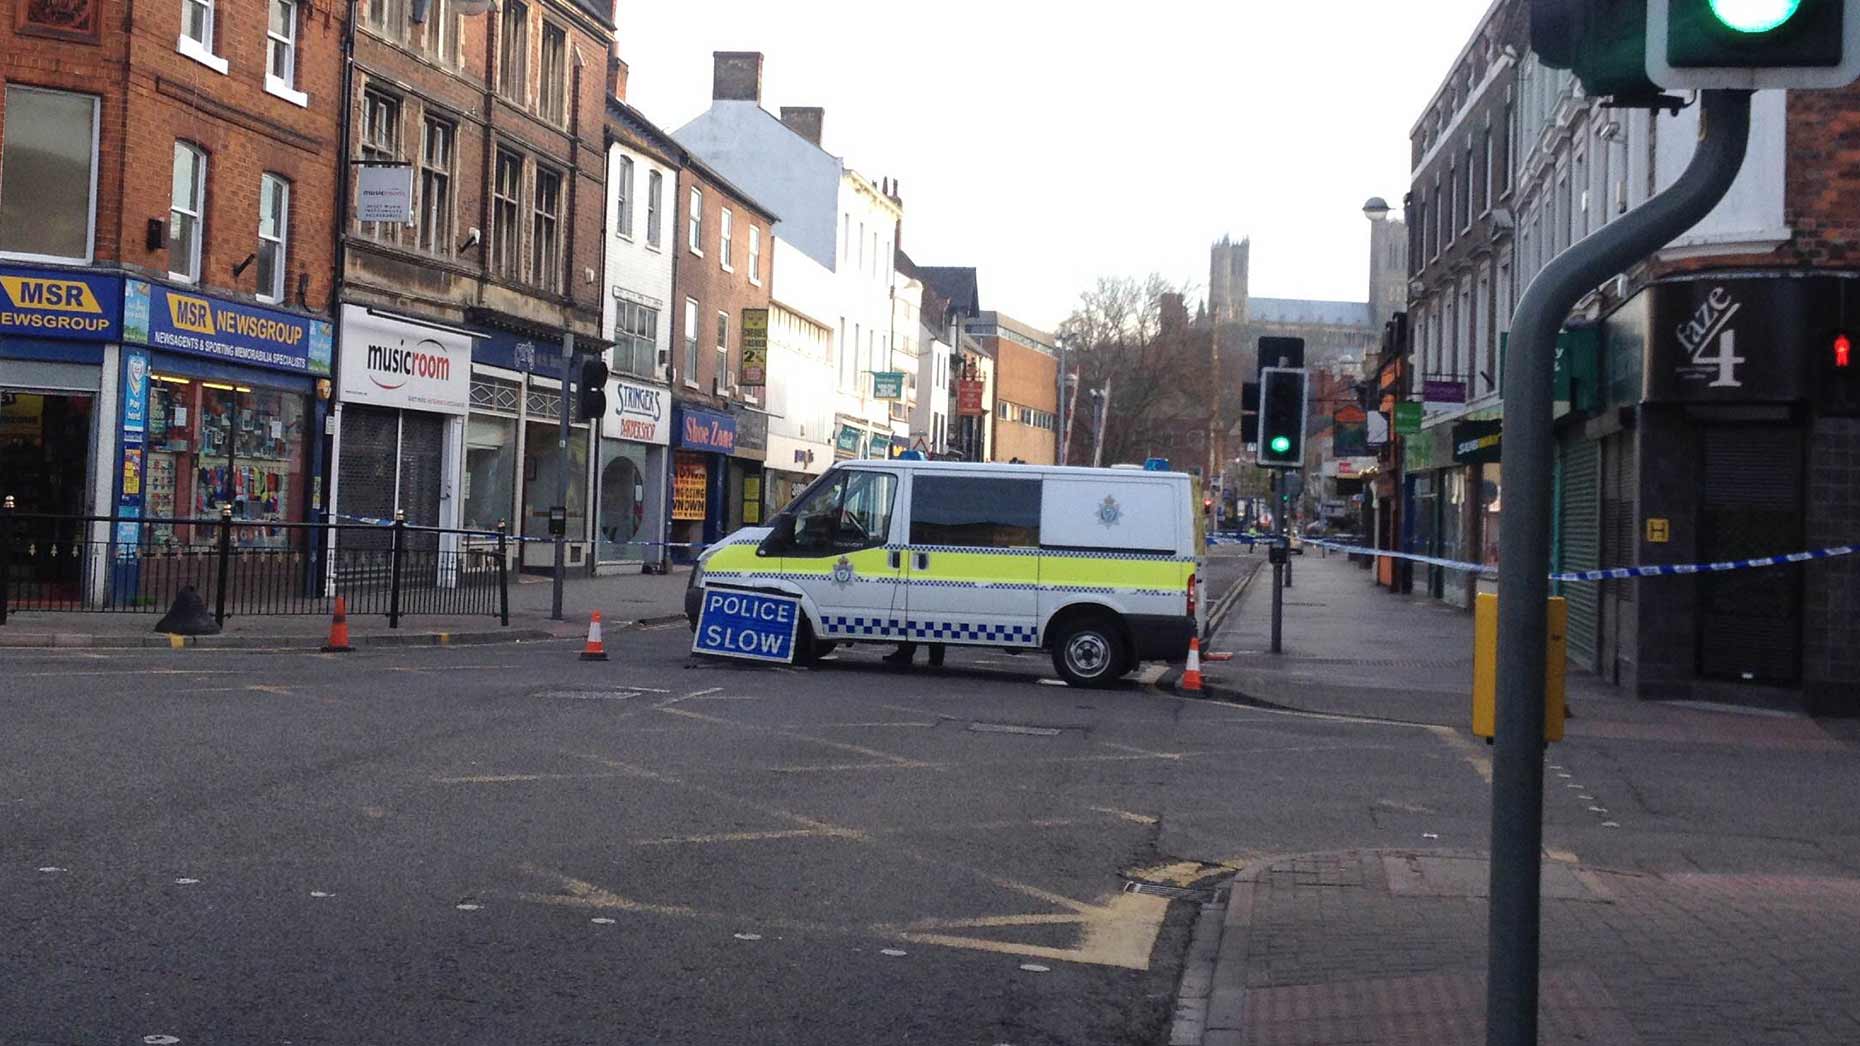 Police investigations closed a part of the High Street. Photo: Chris Brandrick 